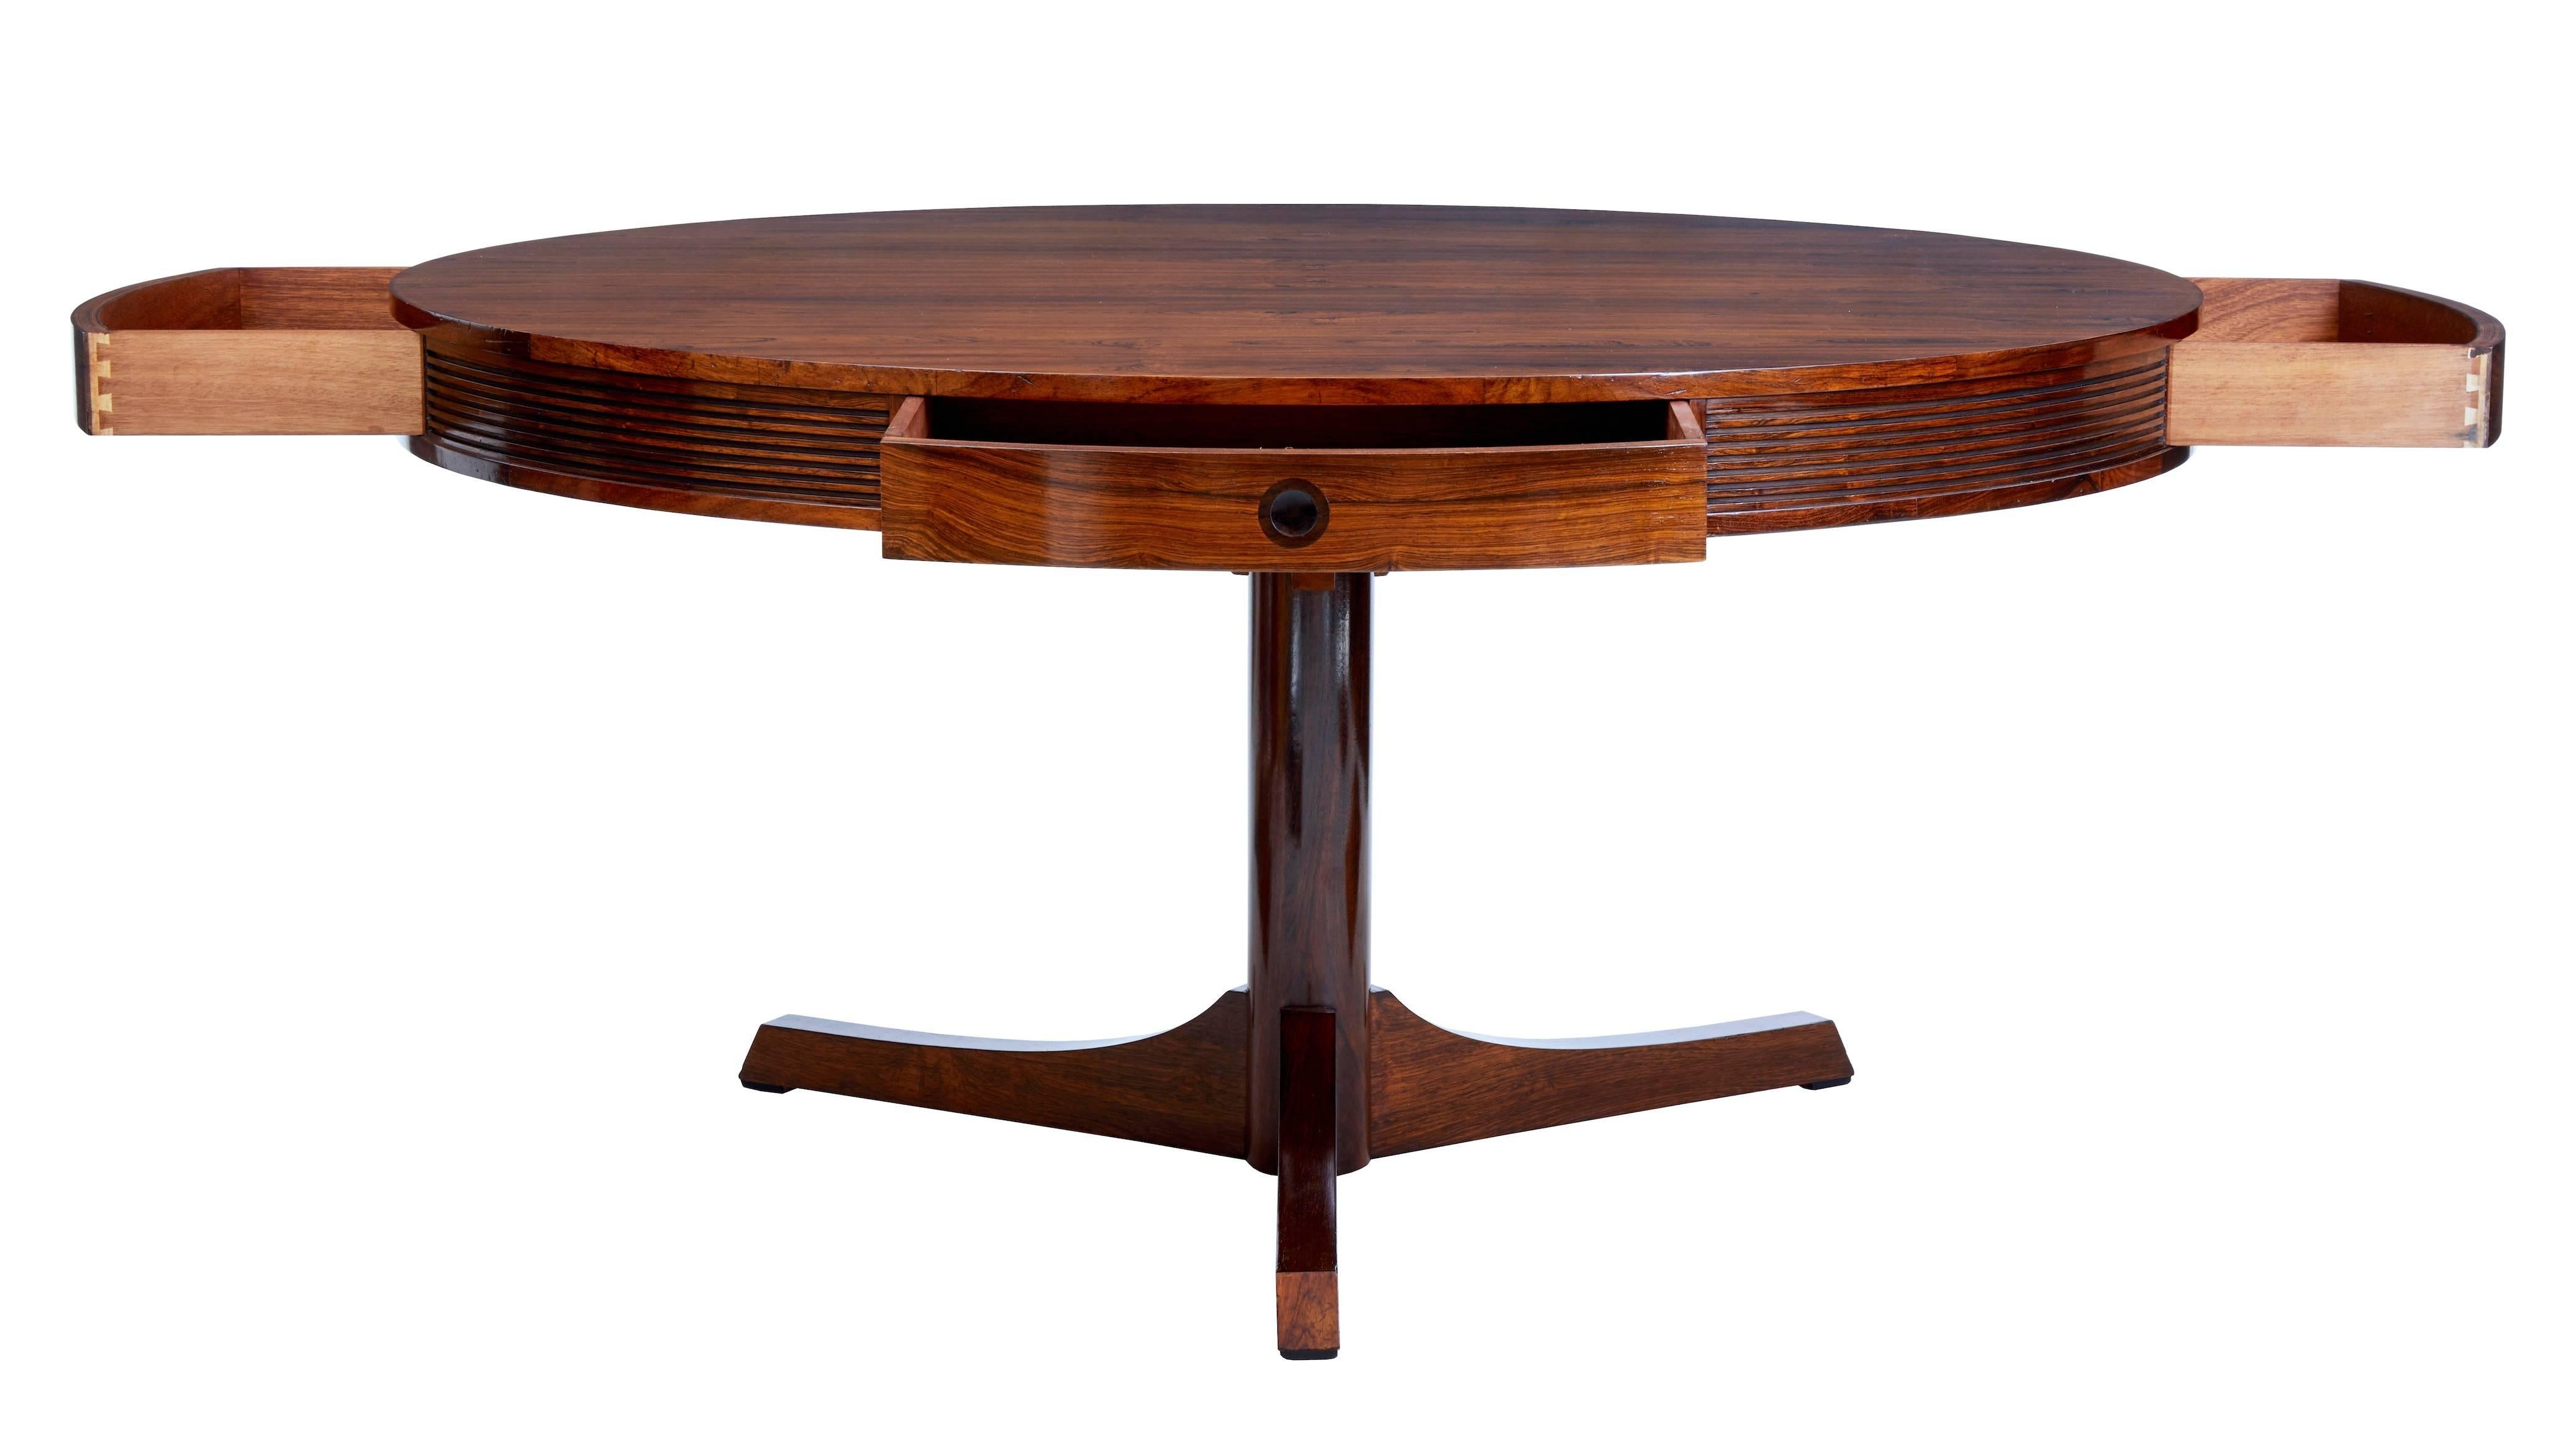 Fine quality mid-1960s drum table by Robert Heritage for Archie Shine.
Striking Rio rosewood matched veneer top.
Reeded frieze in between four drawers around the surface.
There are many possible uses for this table, such as a dining table or